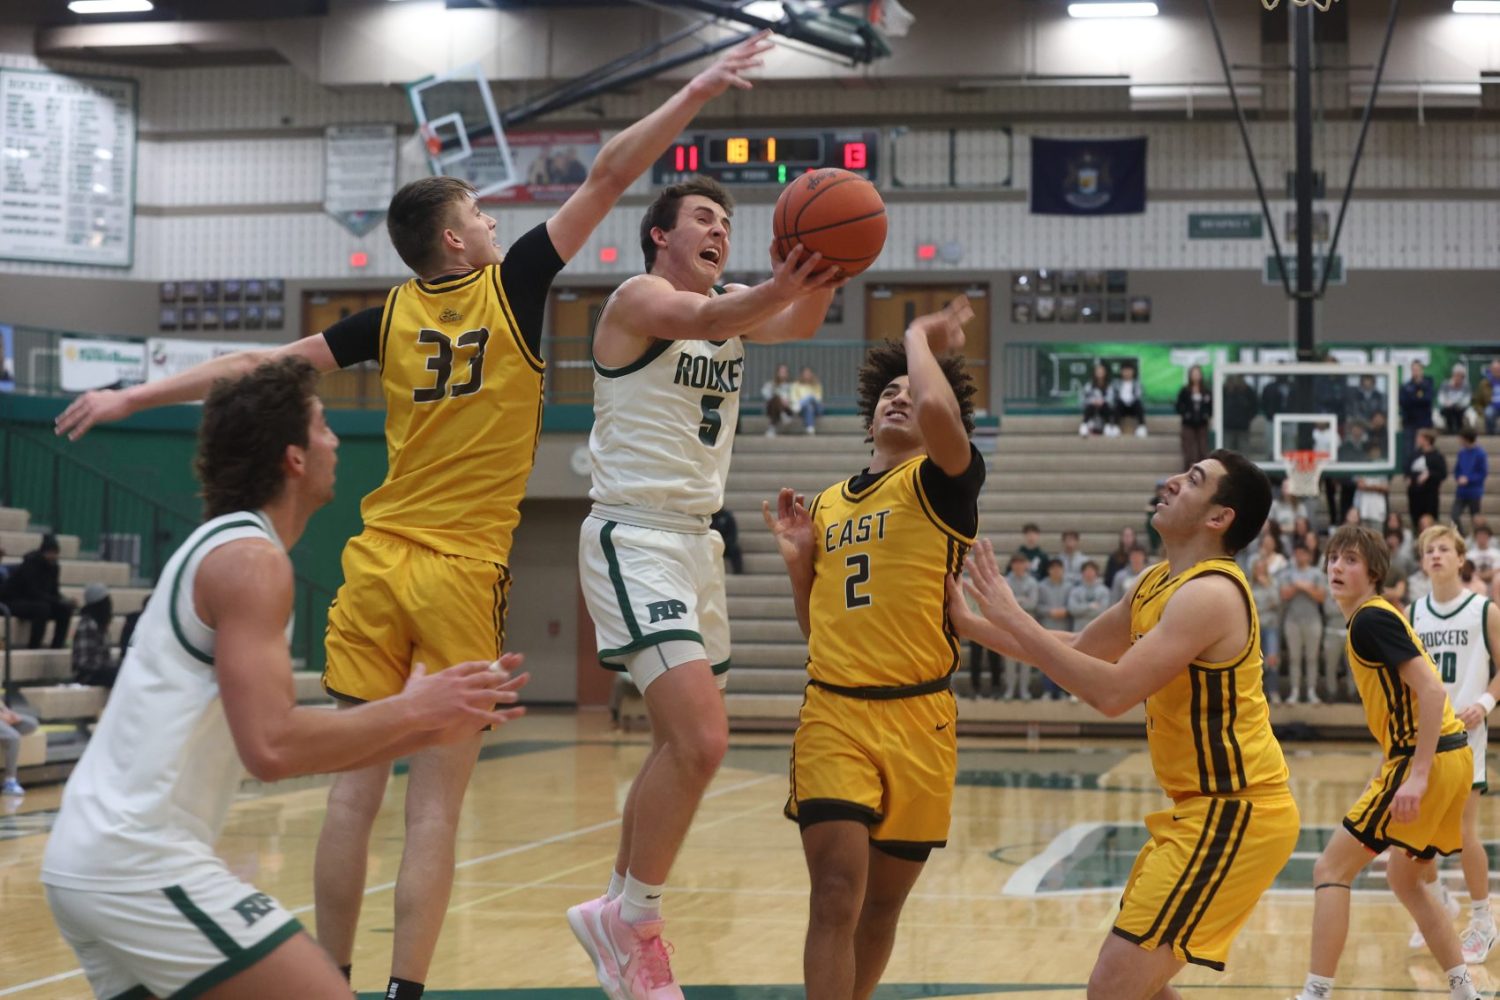 Reeths-Puffer earns double-digit victory over Zeeland East; Whitaker, Ambrose lead the Rockets